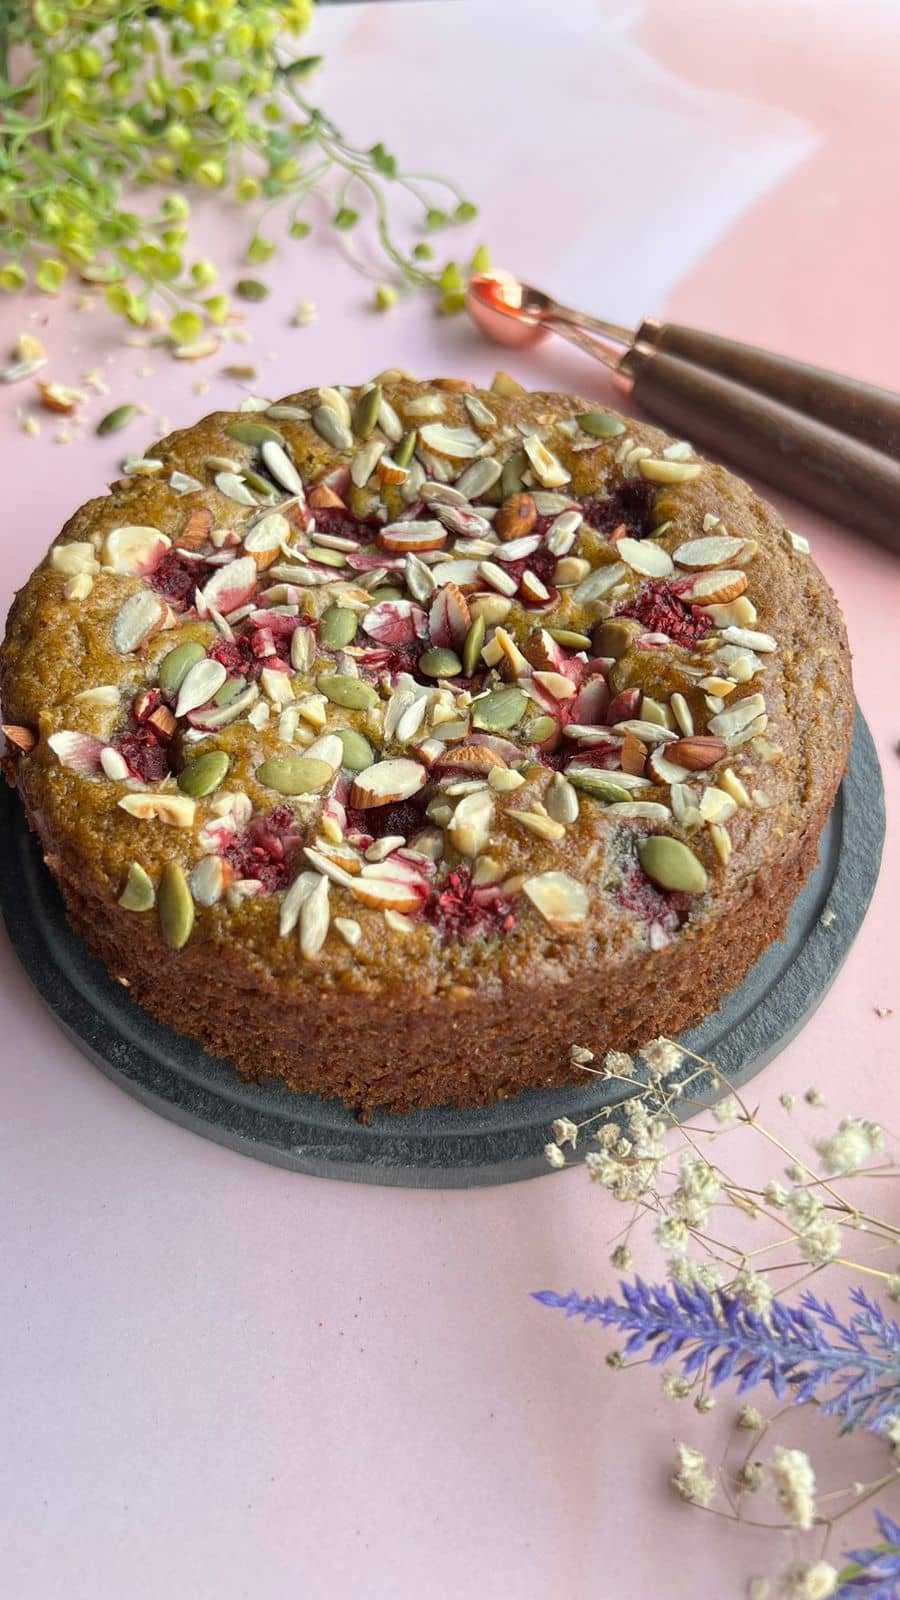 A millet cake by House of Millets